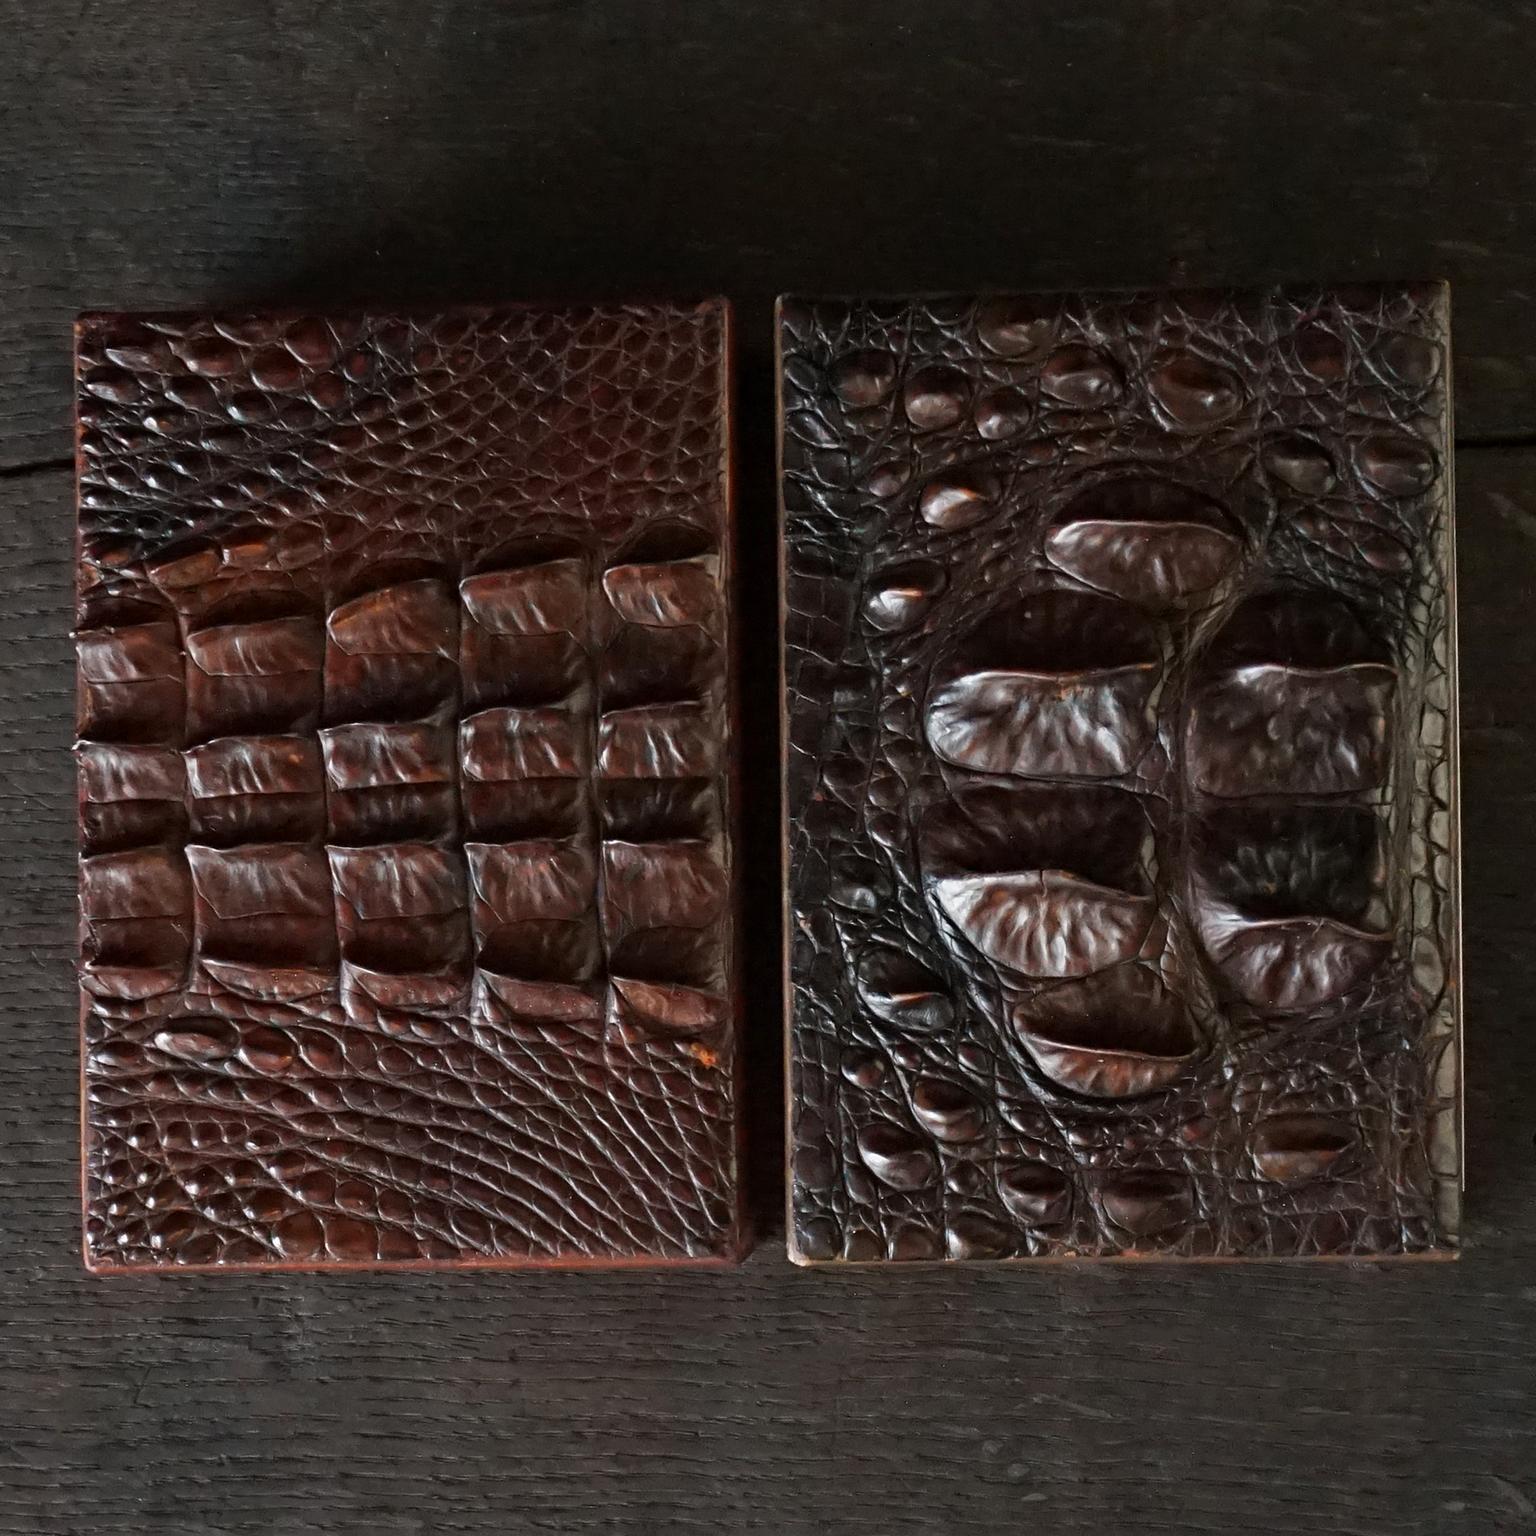 Two very decorative heavy 1960s vintage wood and leather cigar boxes. The boxes are 'coated' outside with leather and pieces of crocodile on top and cork on the bottom (to avoid scratches on your desk or table).
The inside is lined with cedar